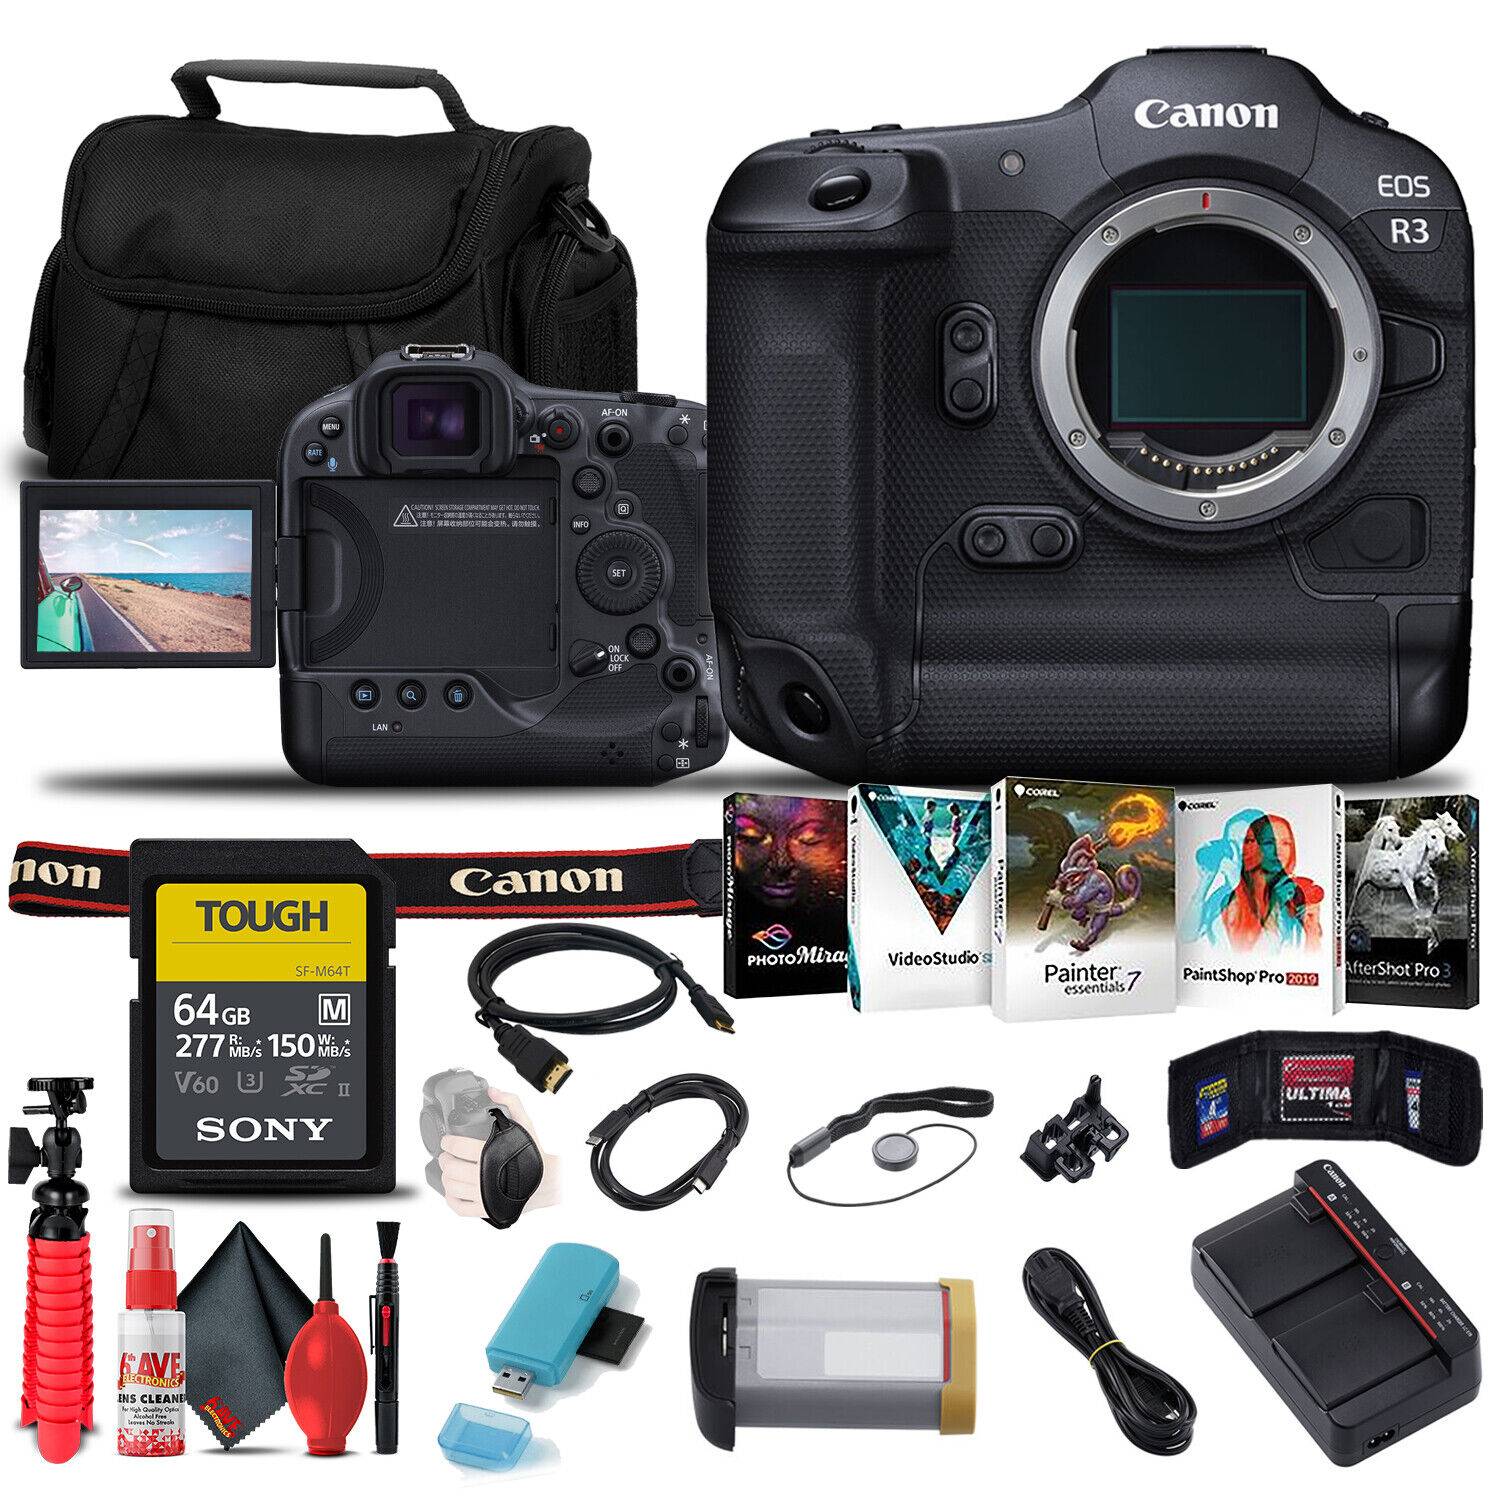  Canon EOS M50 Mark II Mirrorless Camera with EF-M 18-150mm is  STM Lens (4728C001) + 64GB Card + Color Filter Kit + Filter Kit + 2 x LPE12  Battery +